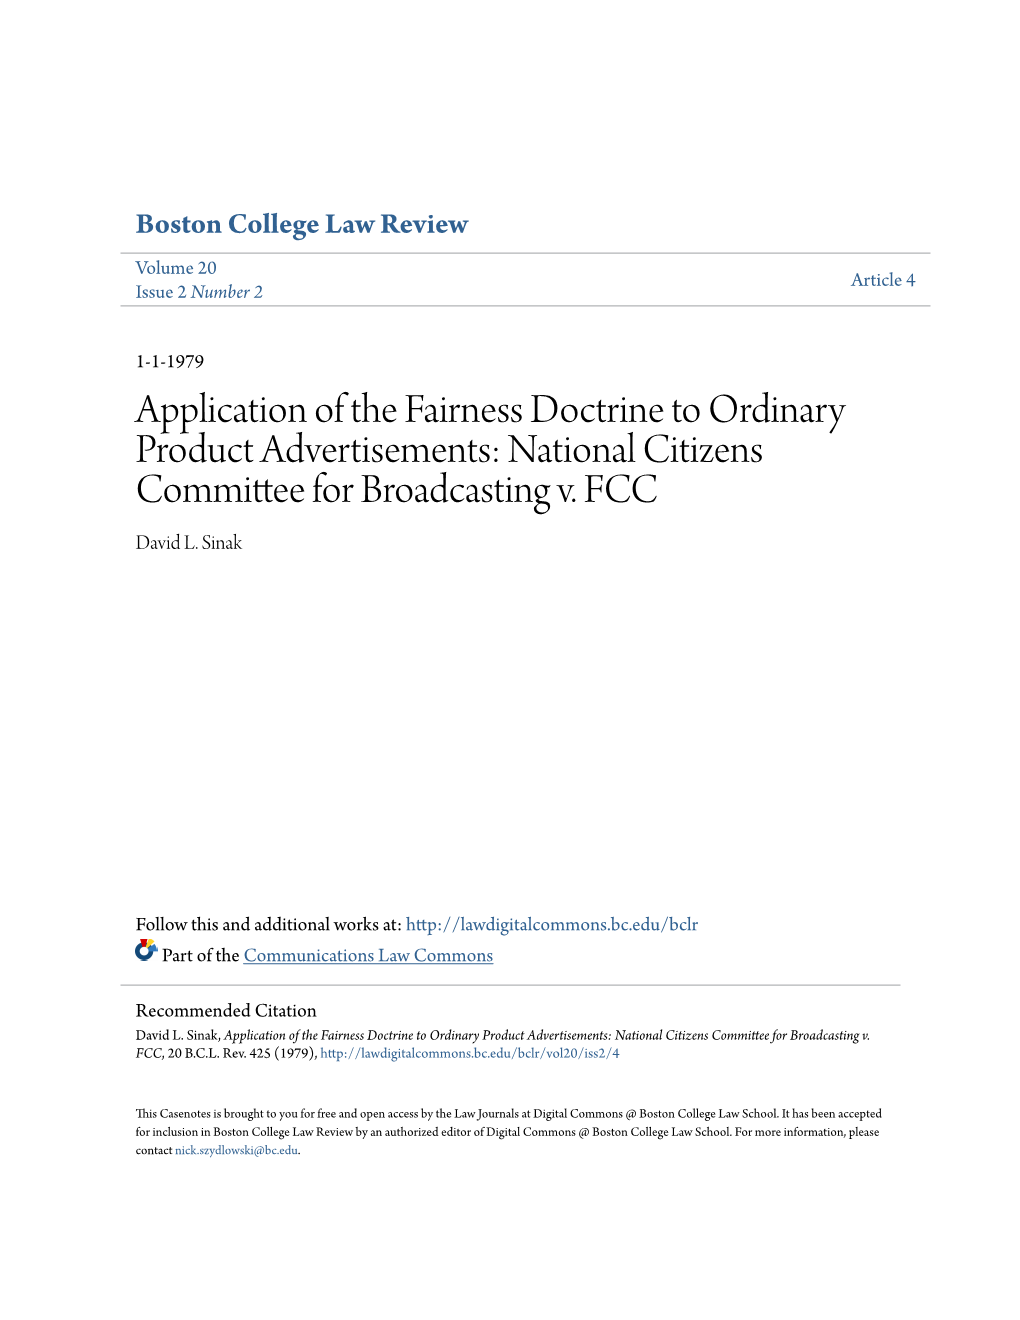 Application of the Fairness Doctrine to Ordinary Product Advertisements: National Citizens Committee for Broadcasting V. FCC David L